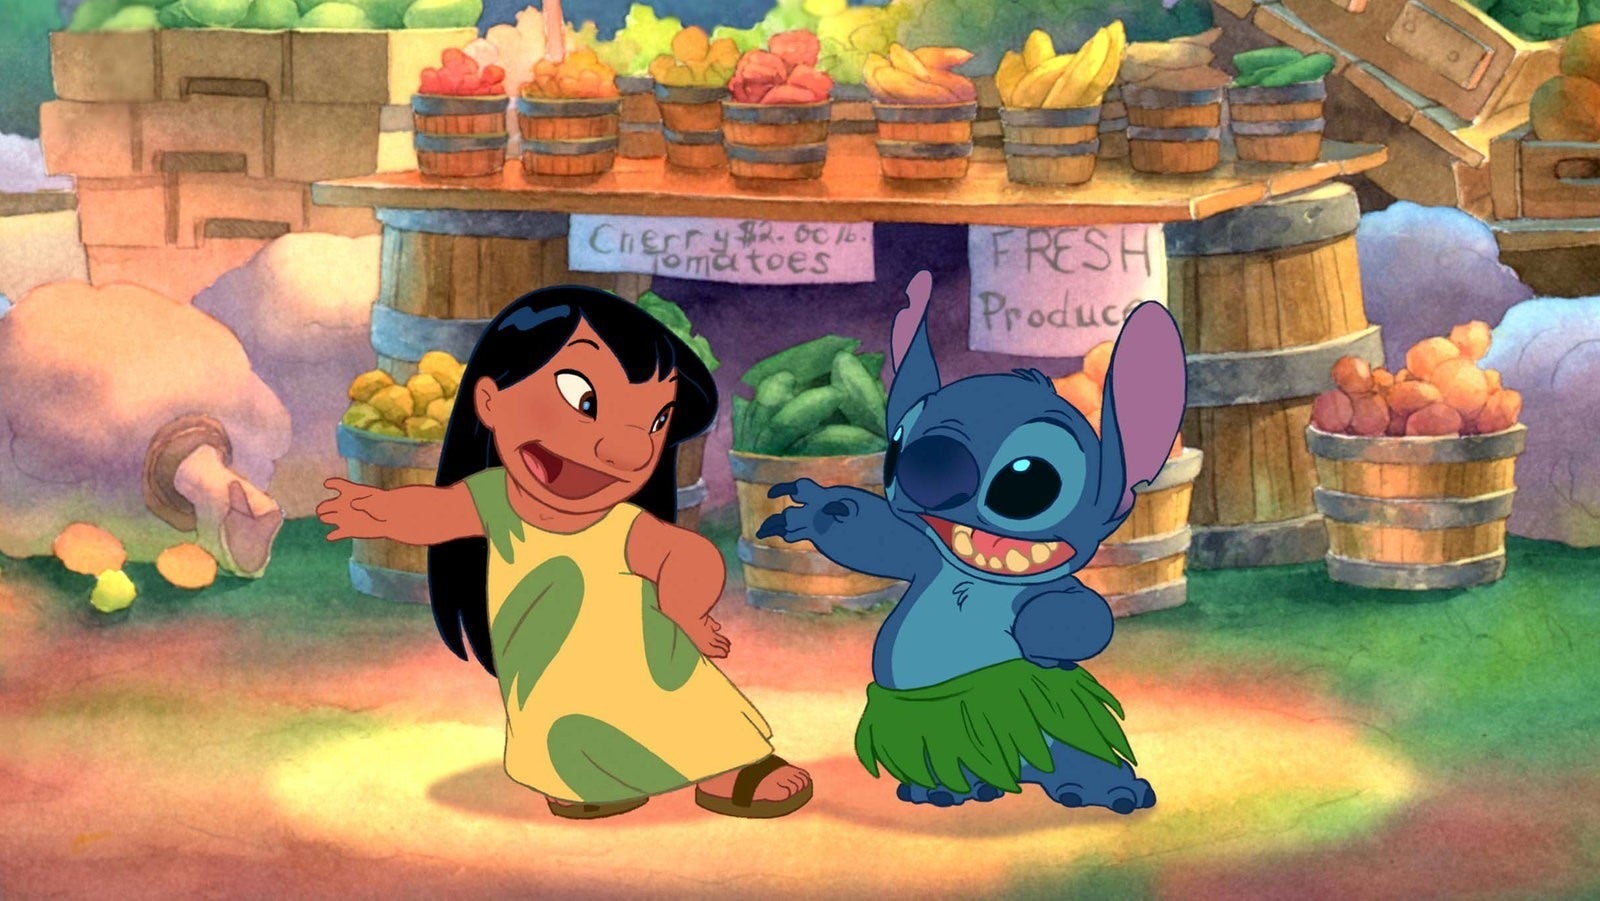 Chris Sanders in Talks to Return for ‘Lilo & Stitch’ Live-Action Remake